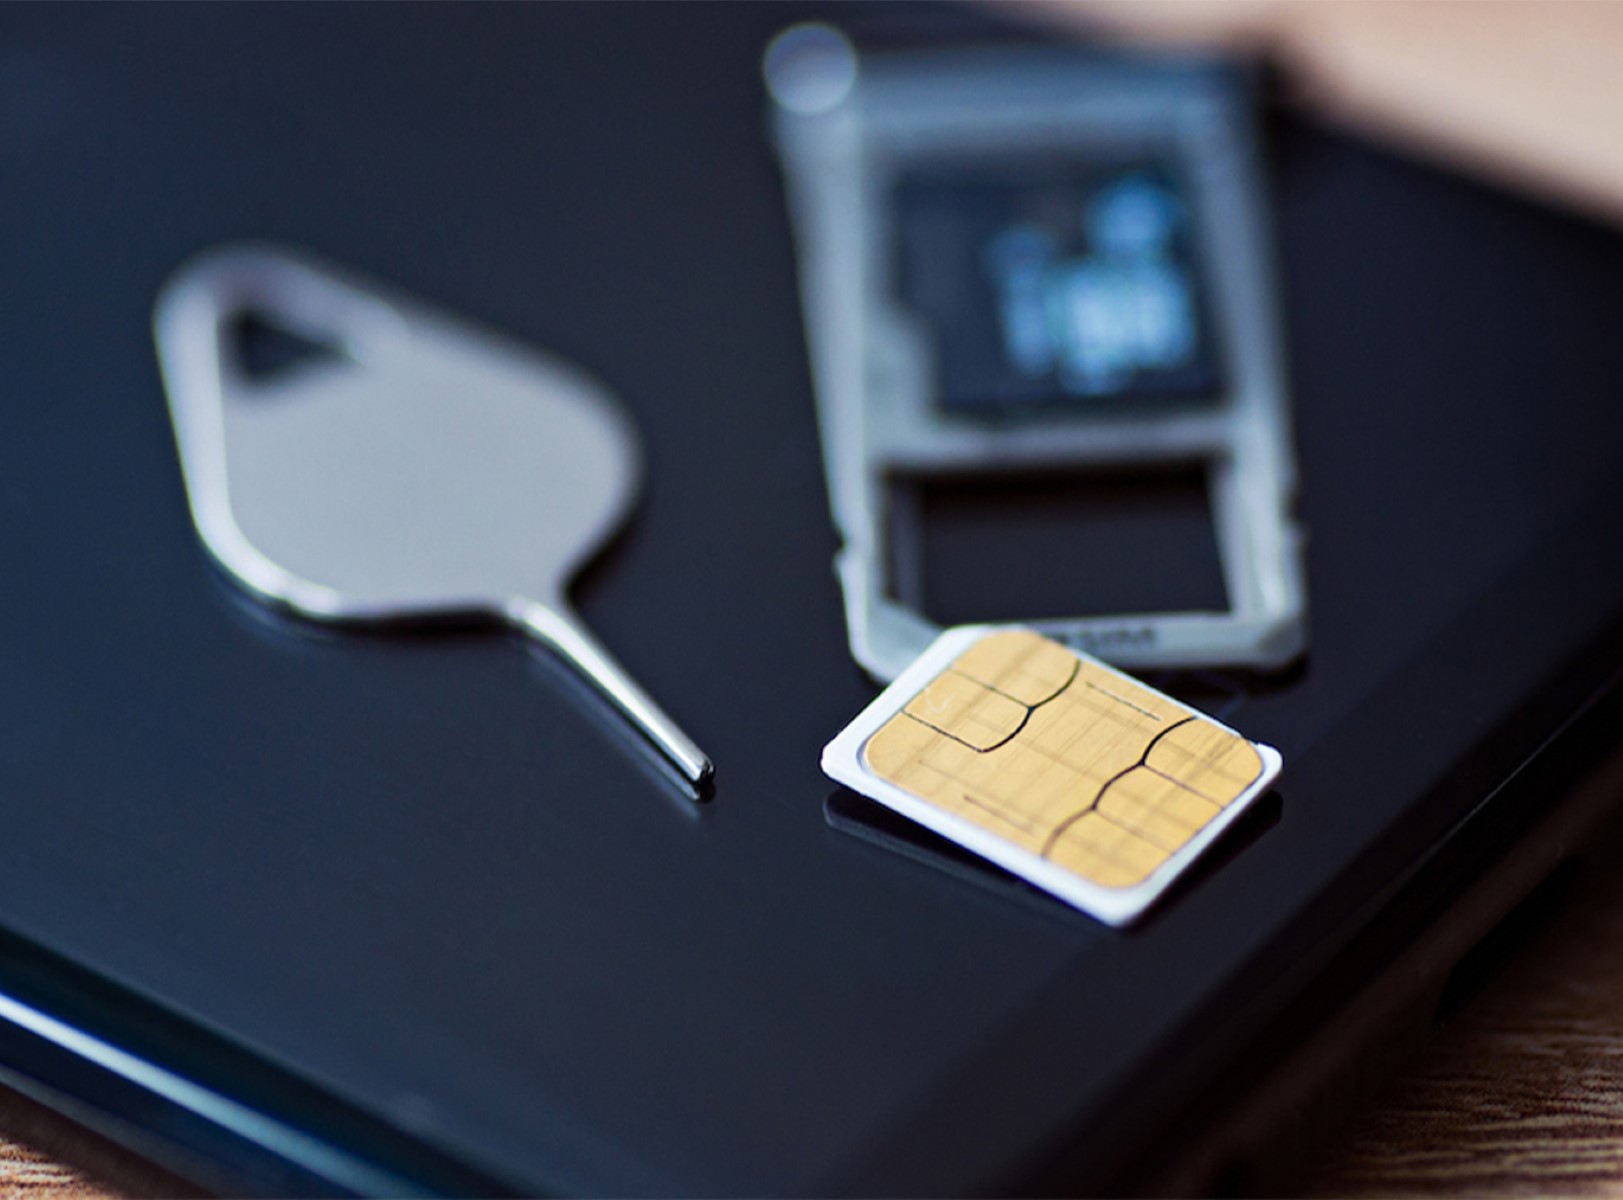 Troubleshooting Reasons For A Non-Working SIM Card